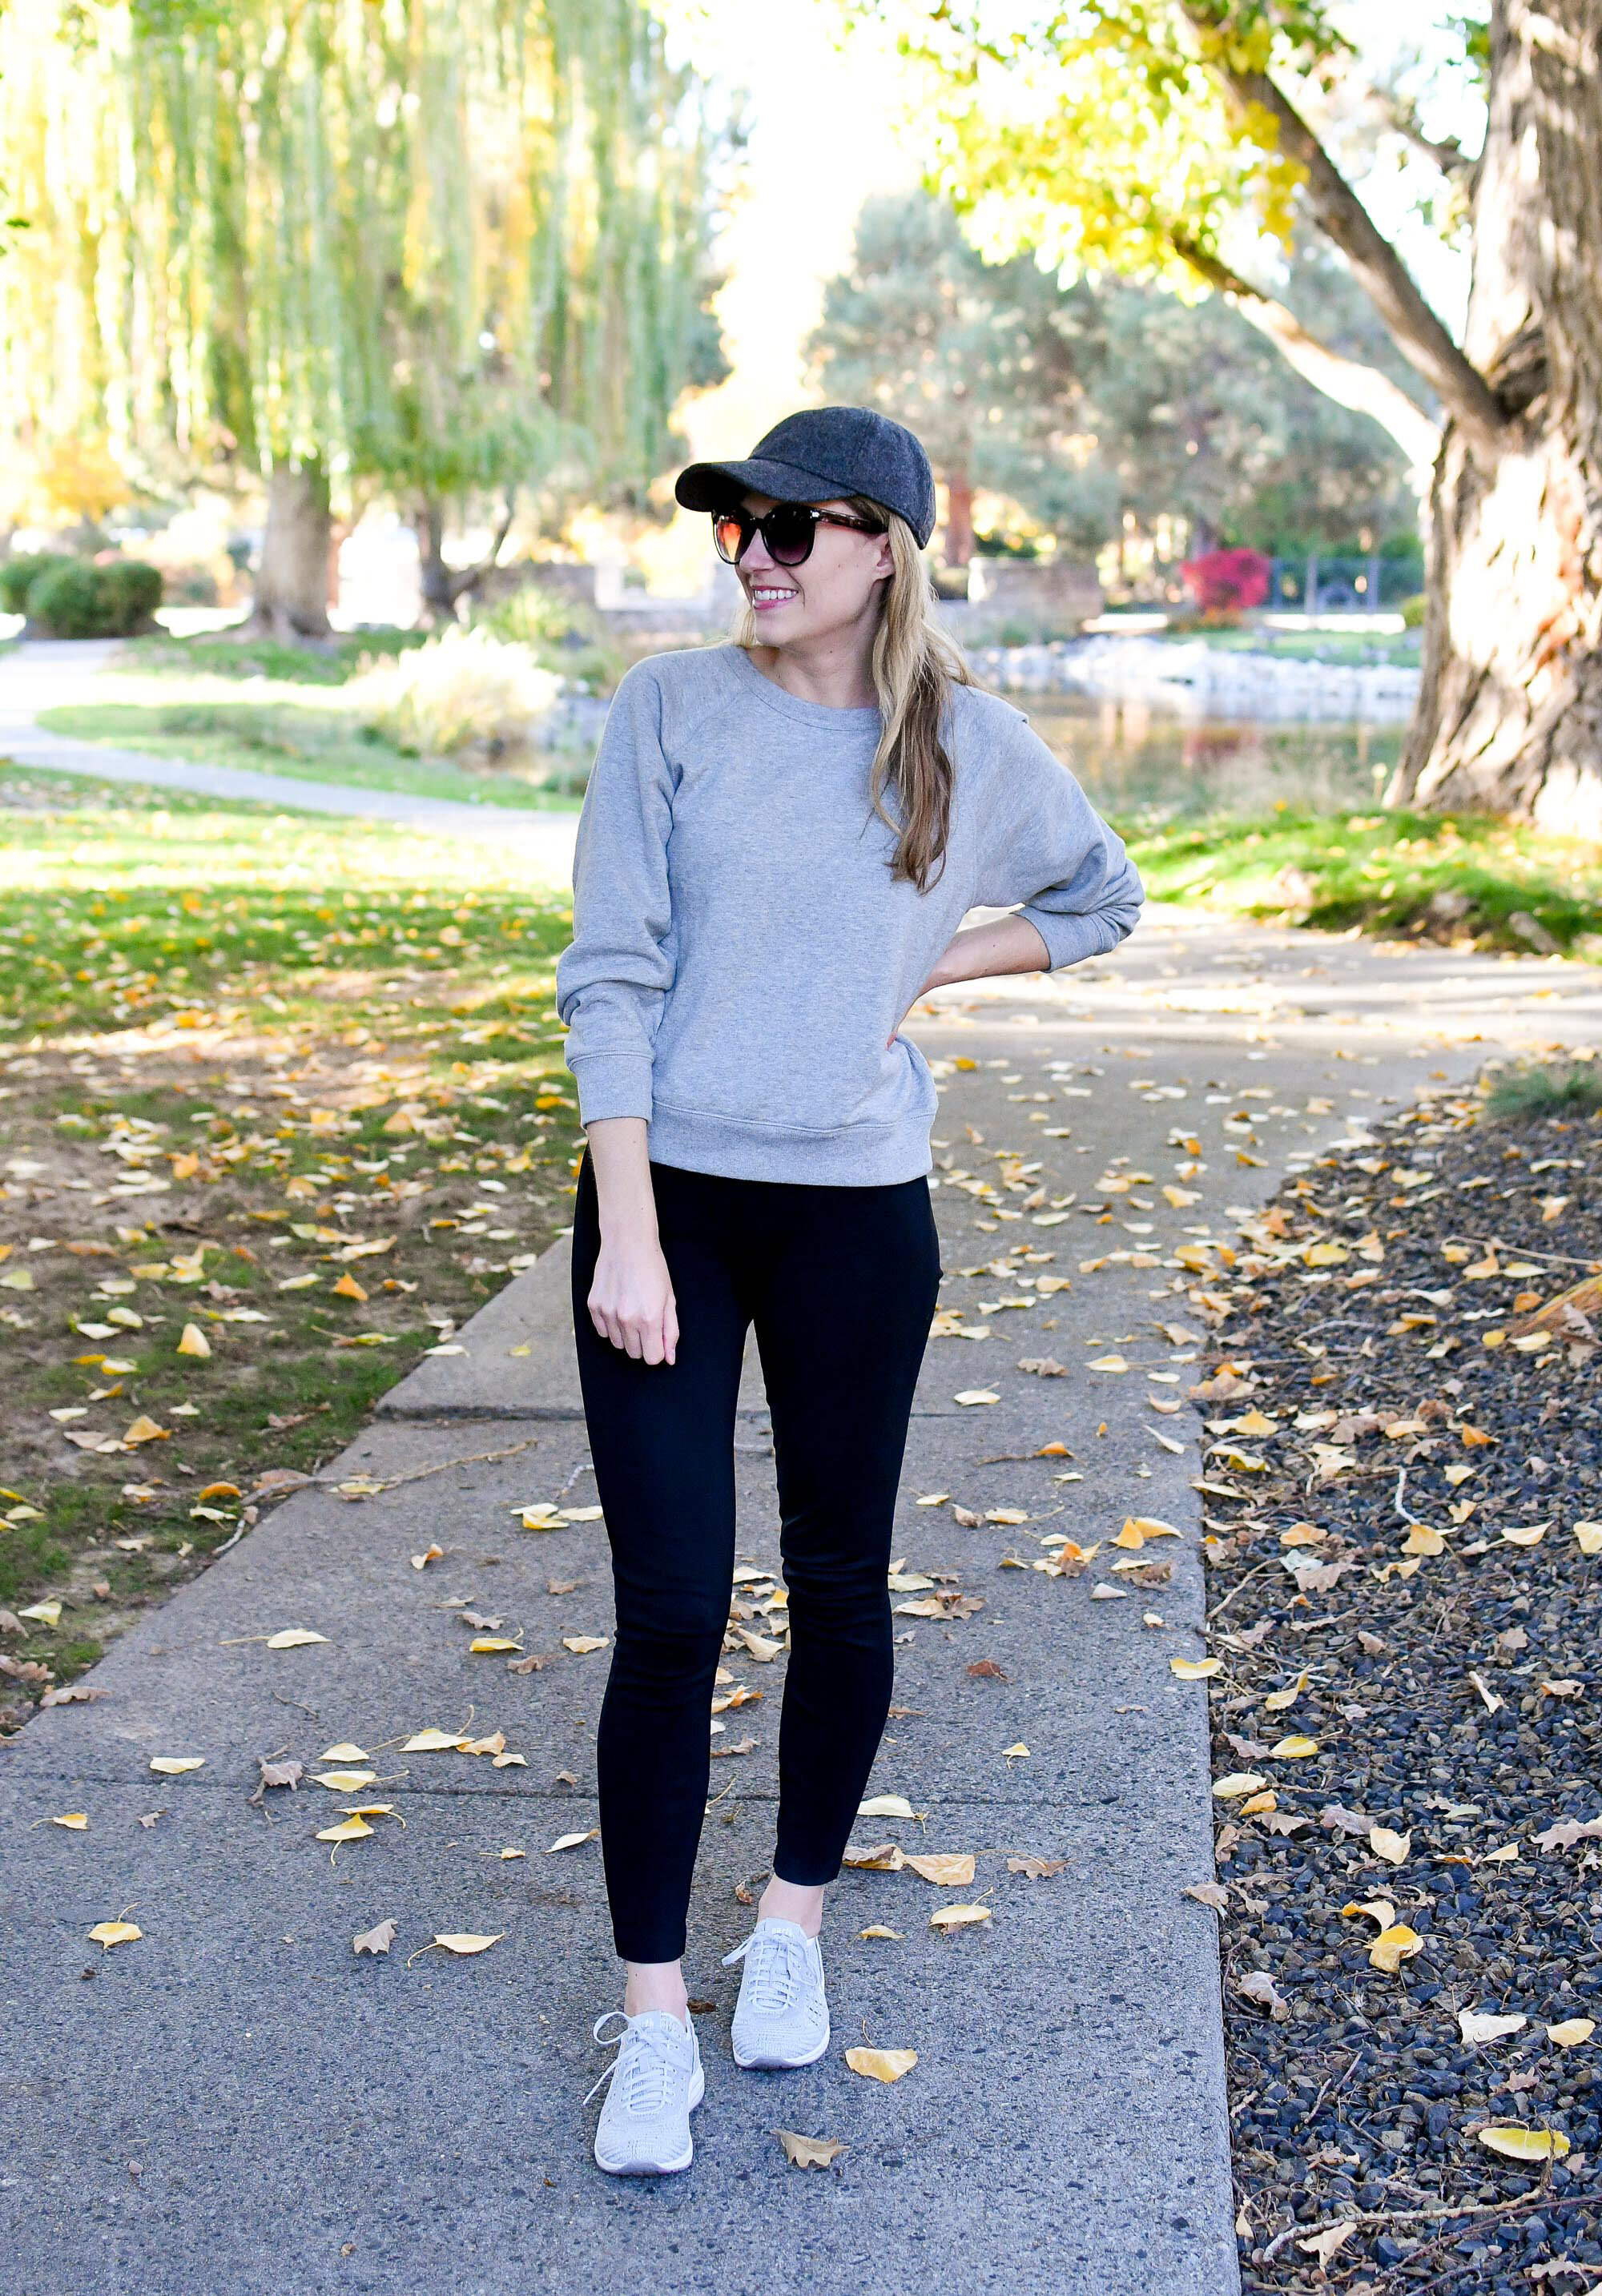 Fall outfit to wear to work from home / grey sweatshirt + leggings + sneakers + wool baseball cap — Cotton Cashmere Cat Hair